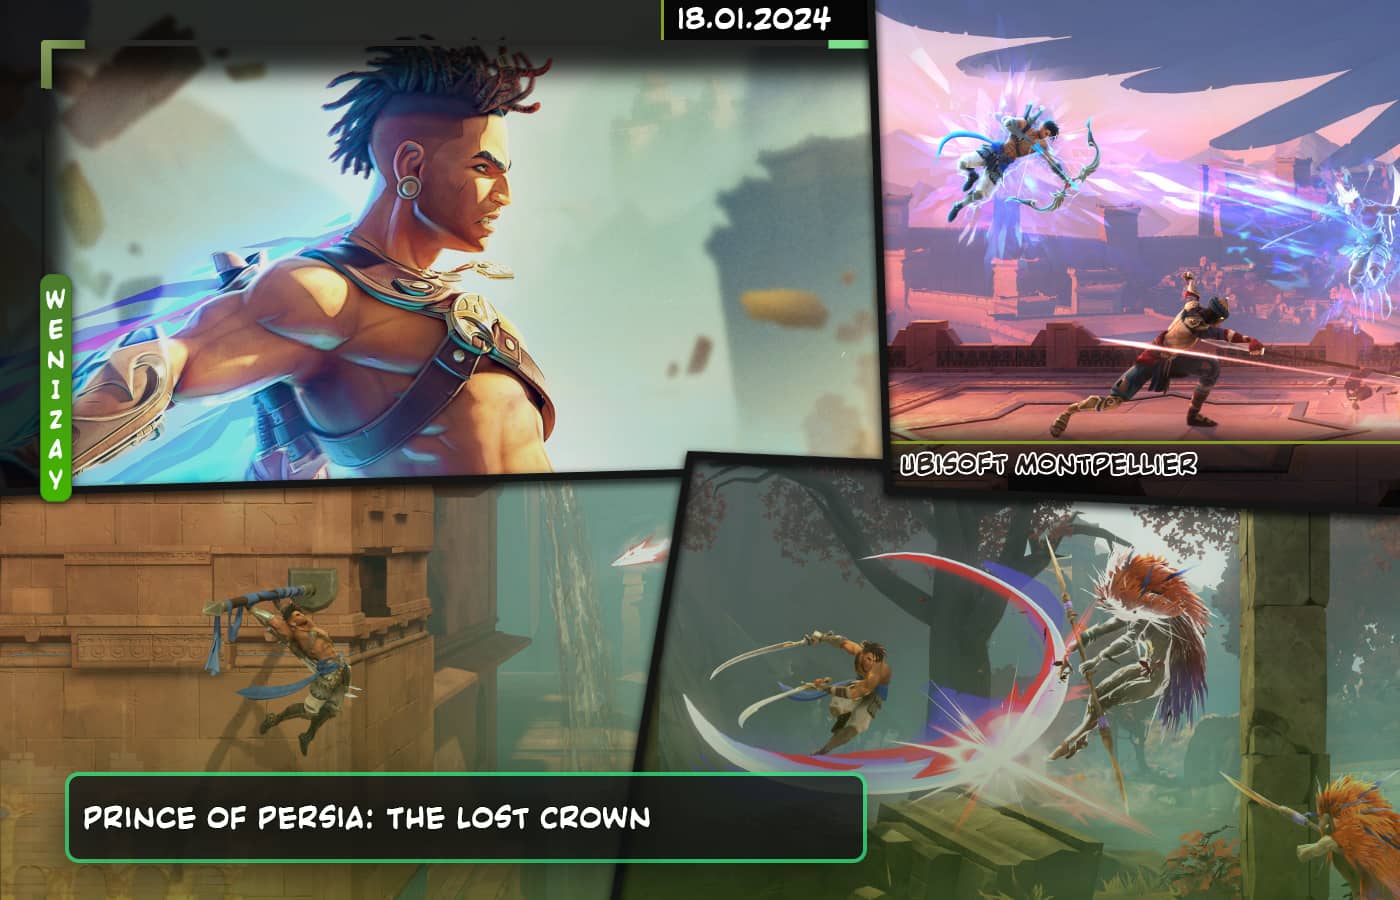 Prince of Persia: The Lost Crown, Prince of Persia 2024